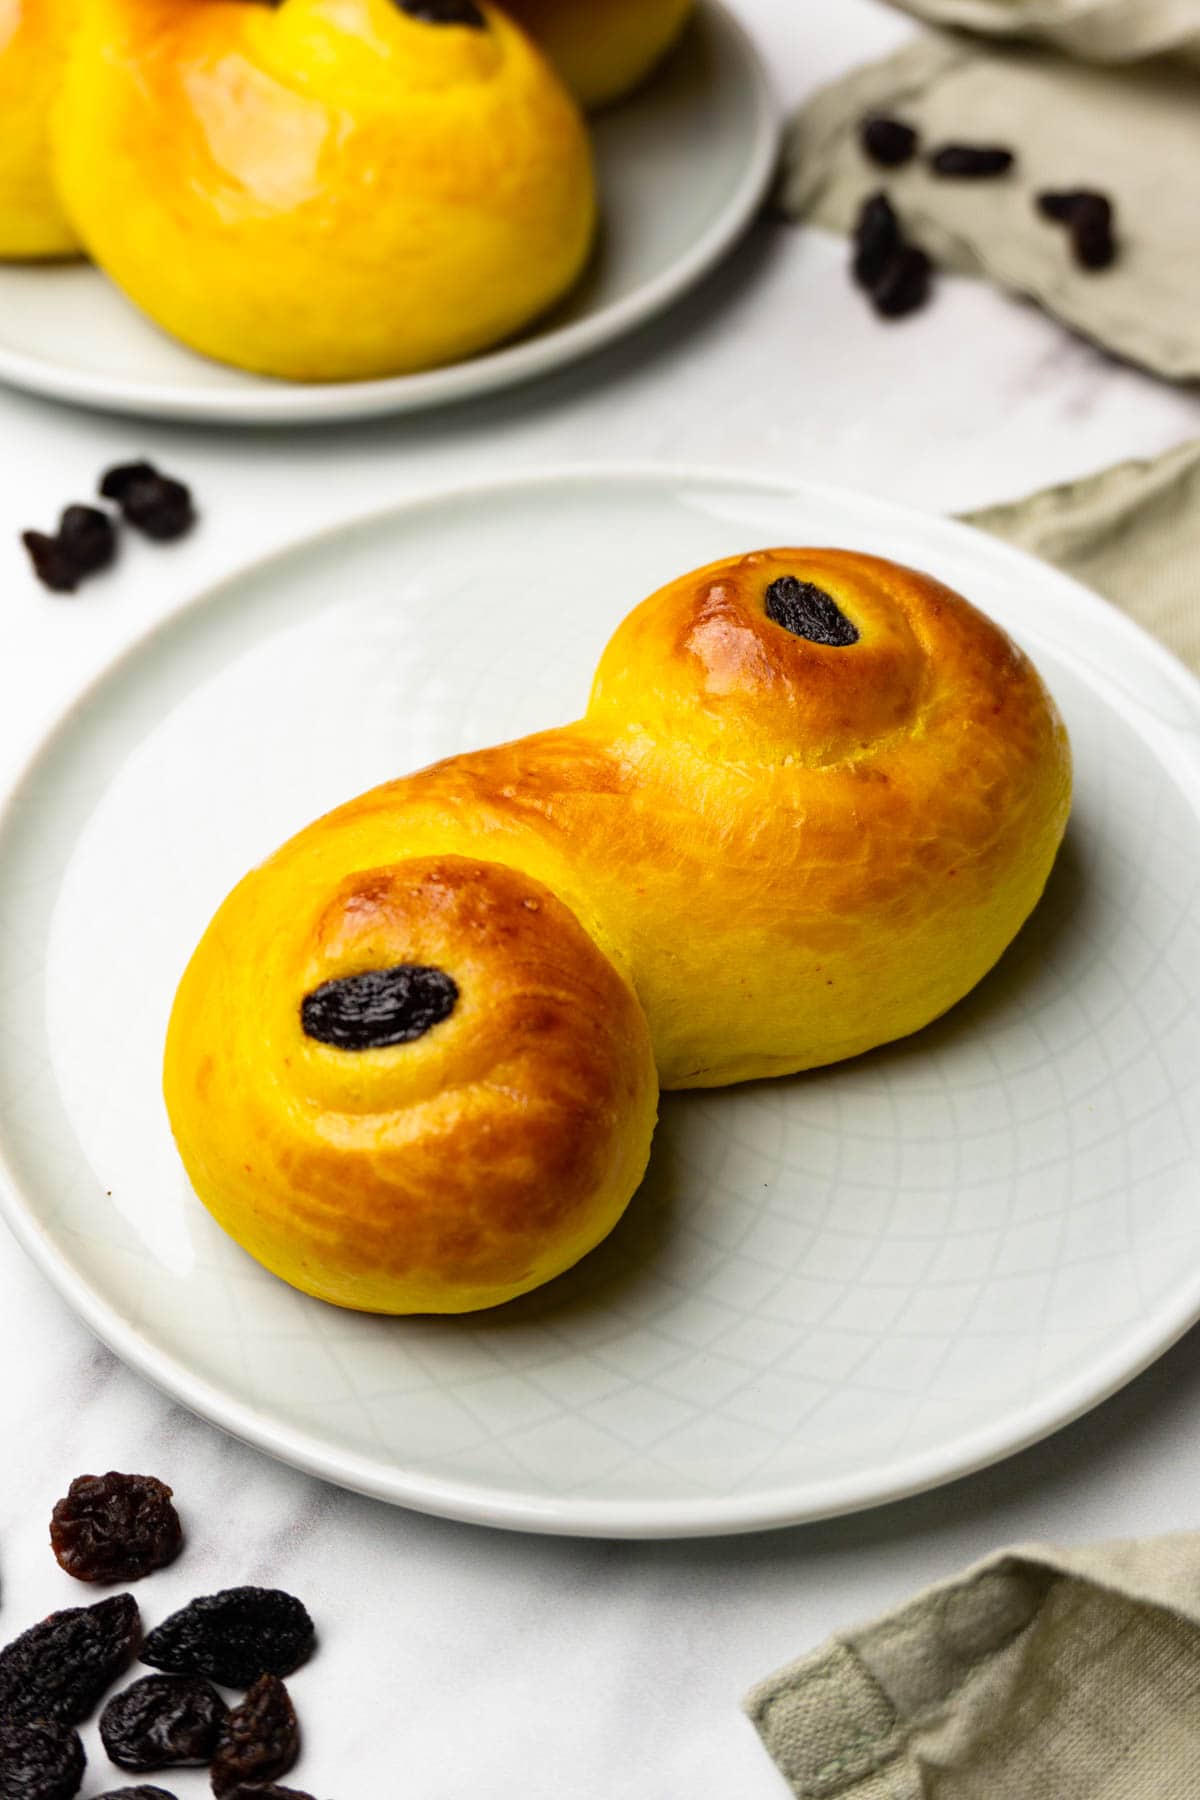 Saffron bun with raisins on a small round plate, more buns on the background.